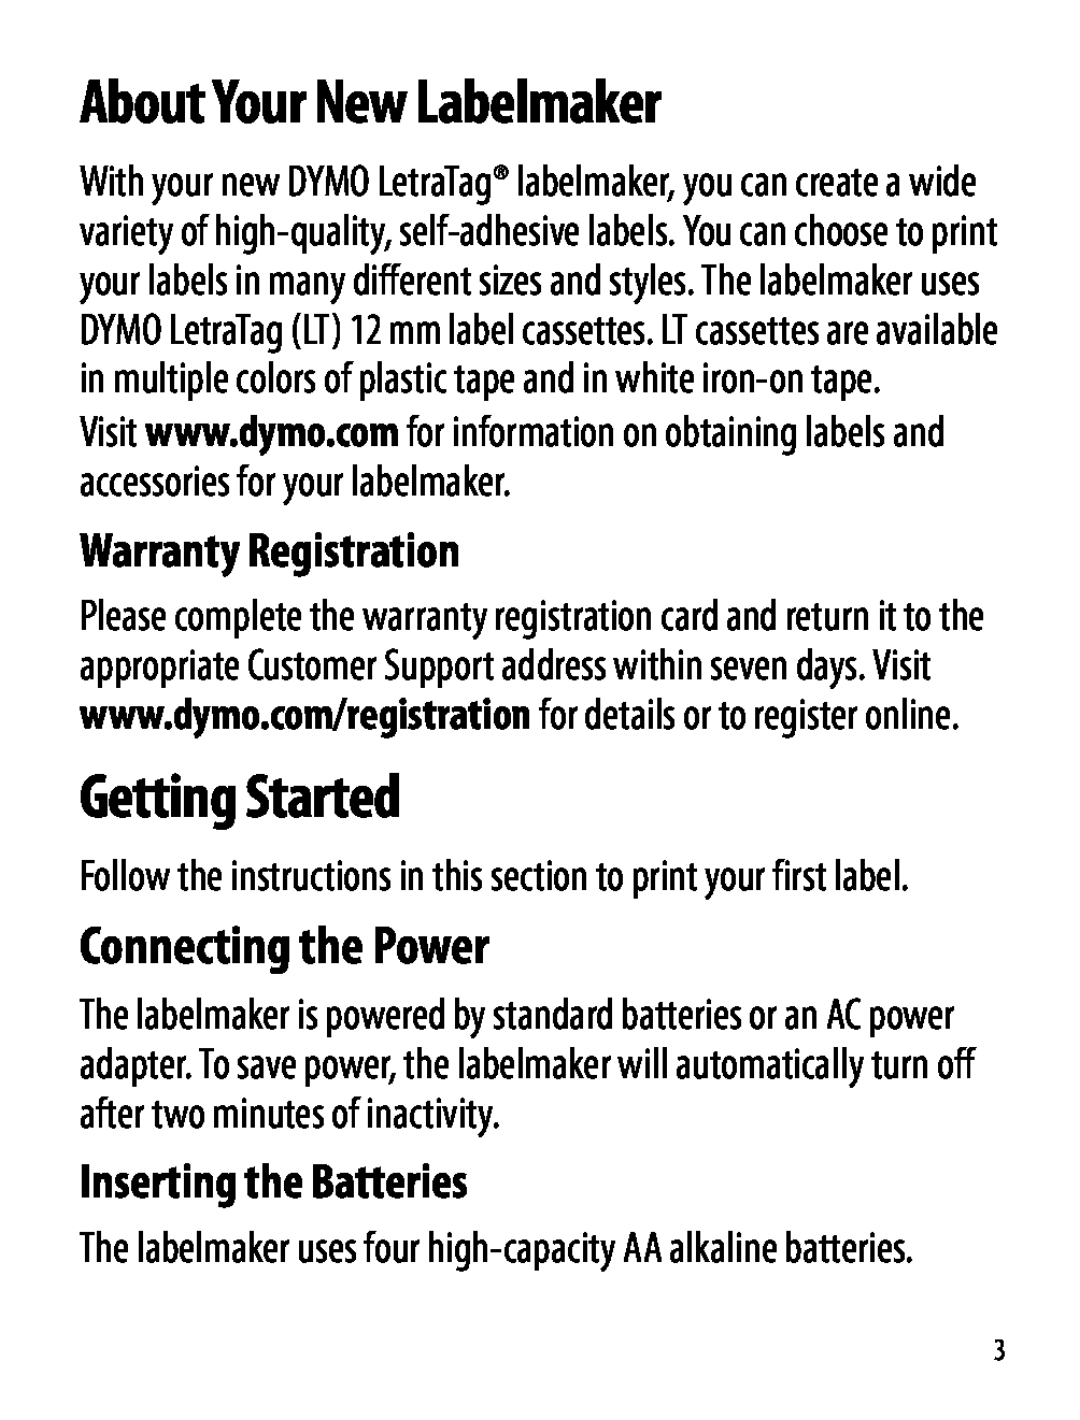 Dymo About Your New Labelmaker, Getting Started, Connecting the Power, Warranty Registration, Inserting the Batteries 